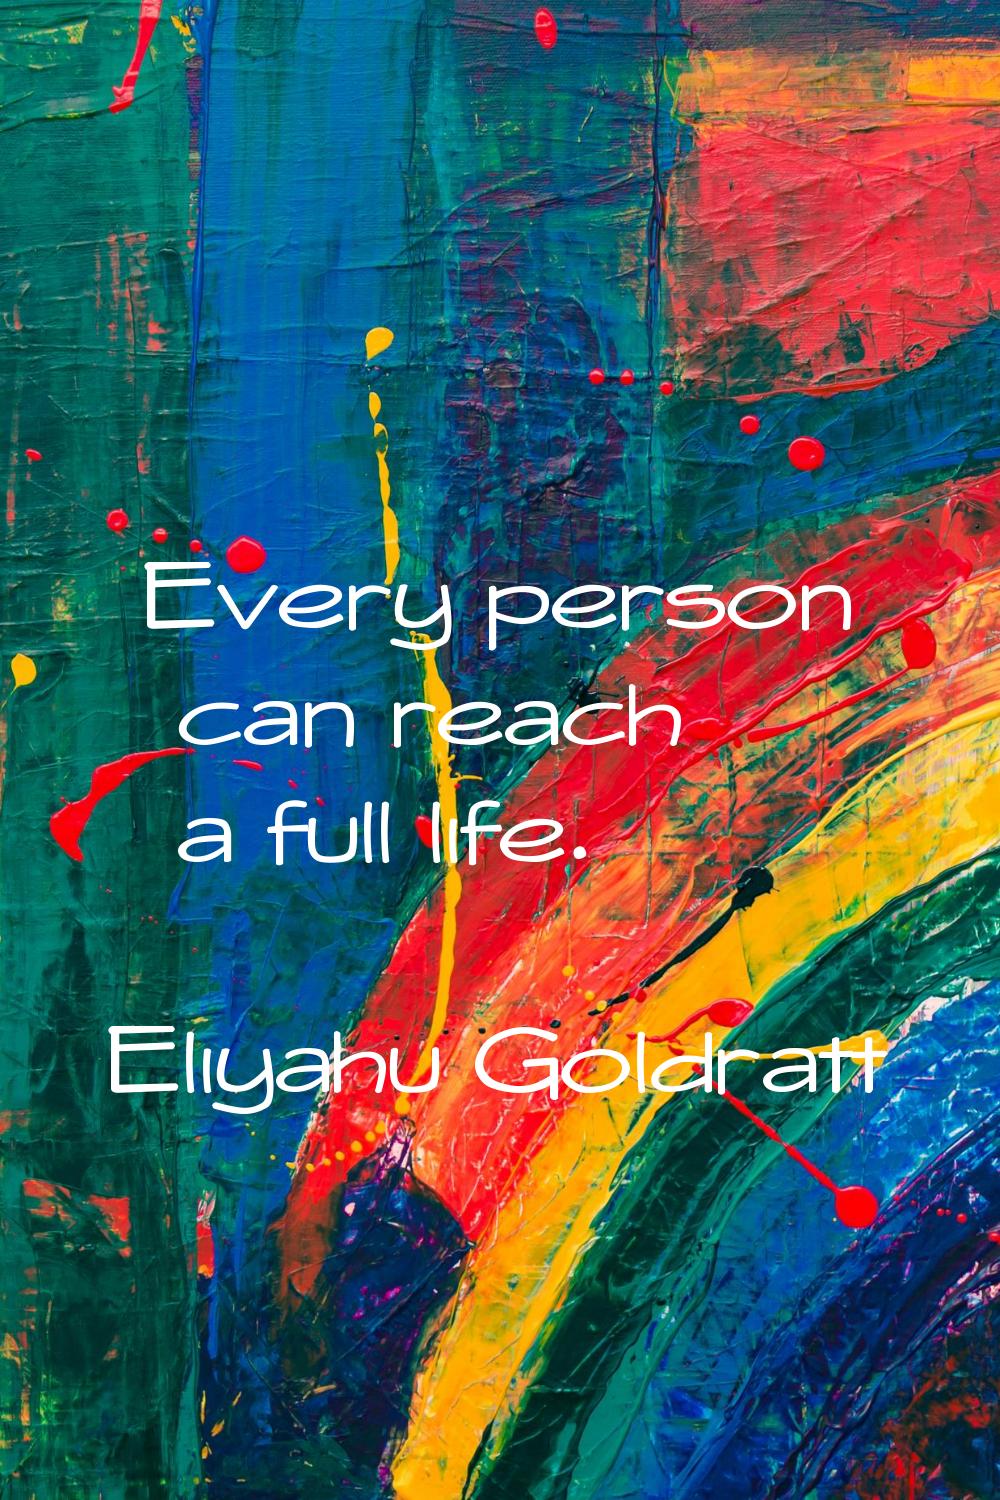 Every person can reach a full life.